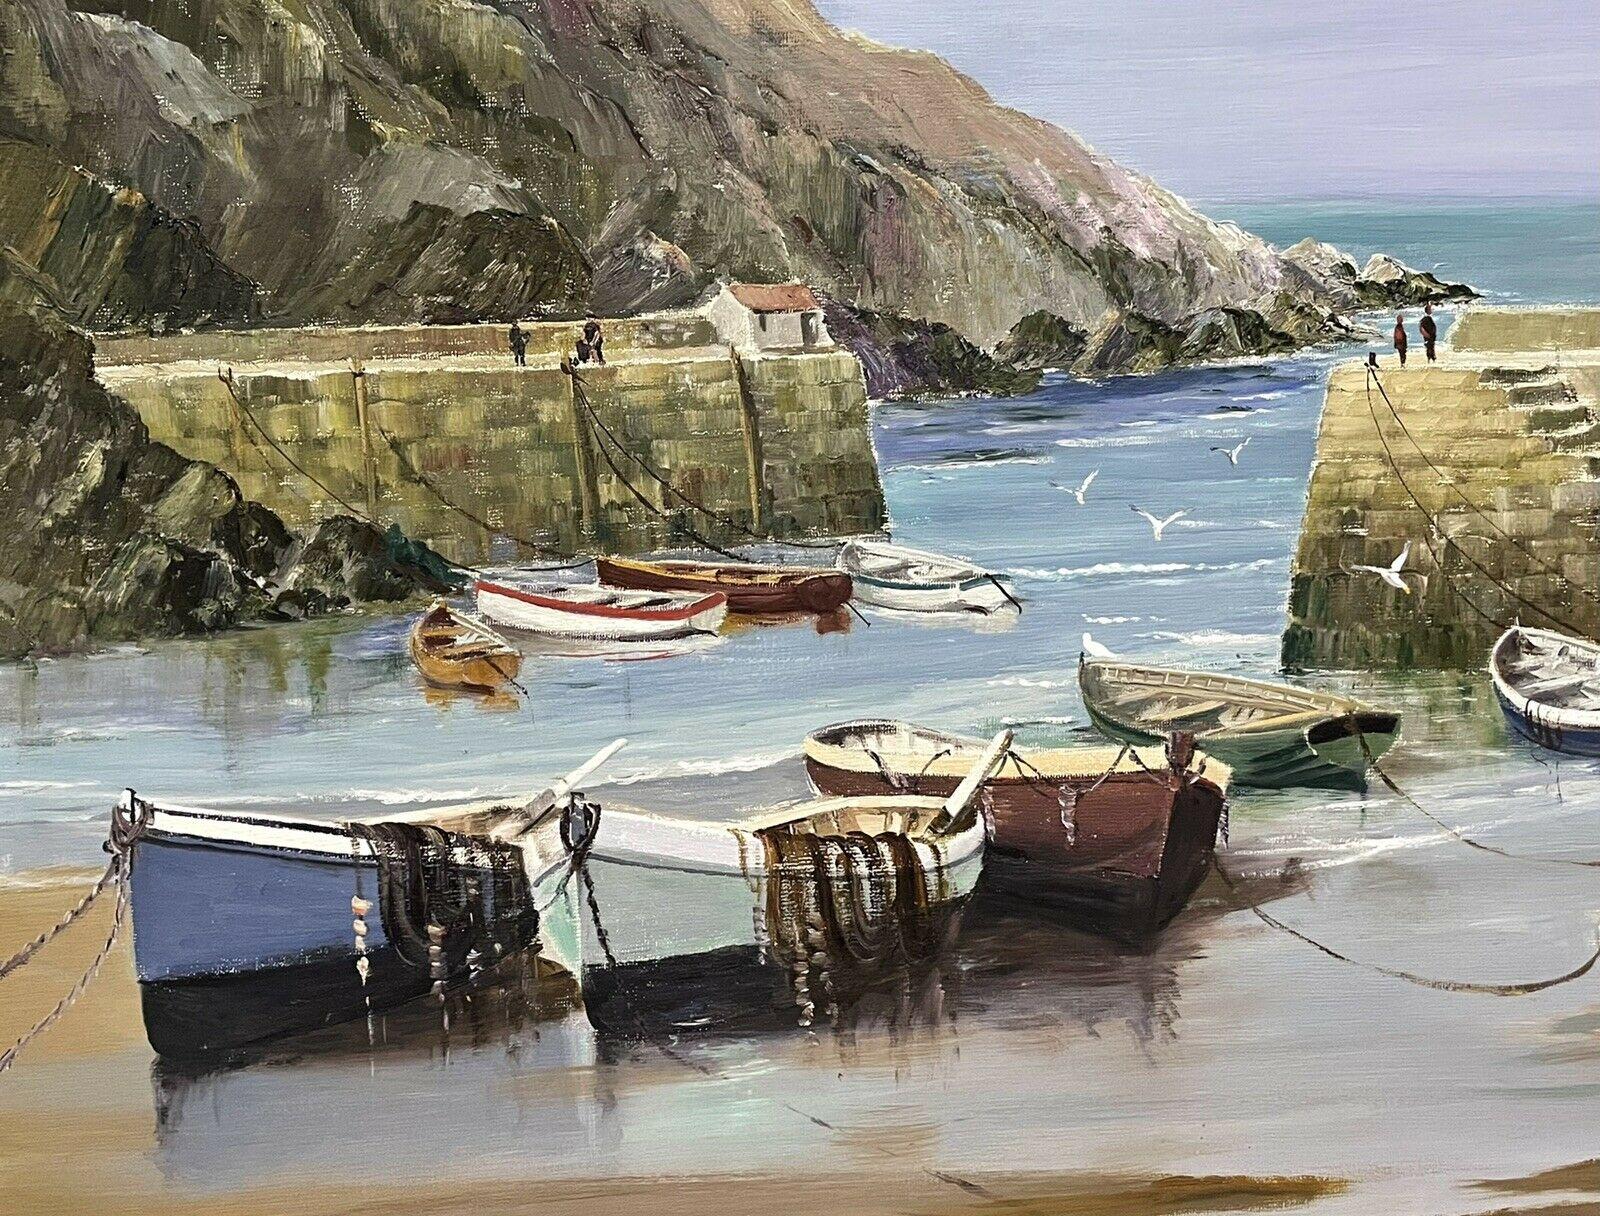 Artist/ School: Lester Atack, British 20th century, signed

Title: The Cornish Fishing Harbour

Medium: oil painting on board, framed.

Size:  painting: 19.5 x 30 inches,   frame: 21.5 x 32 inches 
              
Provenance: UK, private